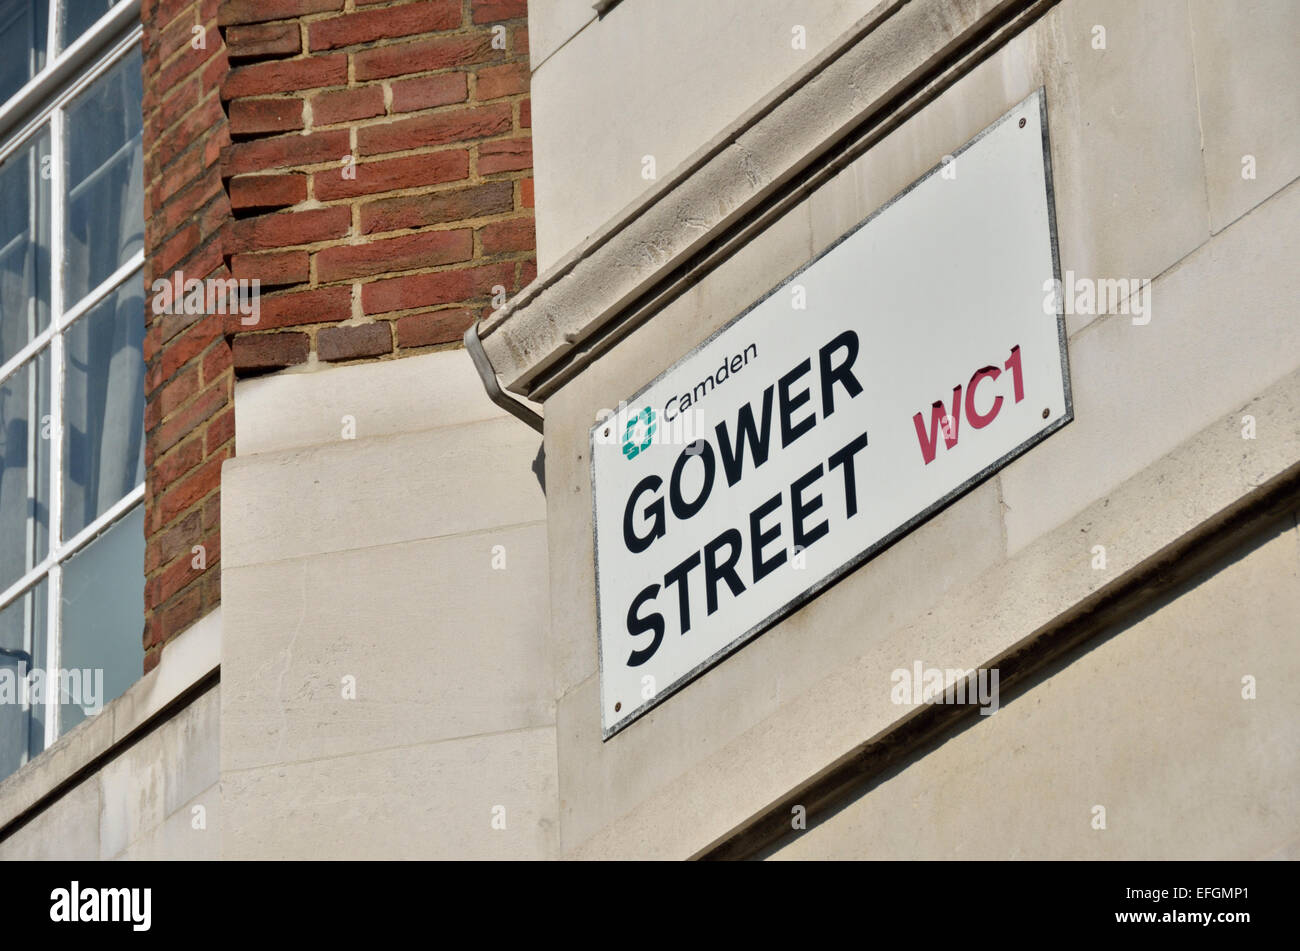 Gower Street WC1 sign on a wall, London, UK Stock Photo